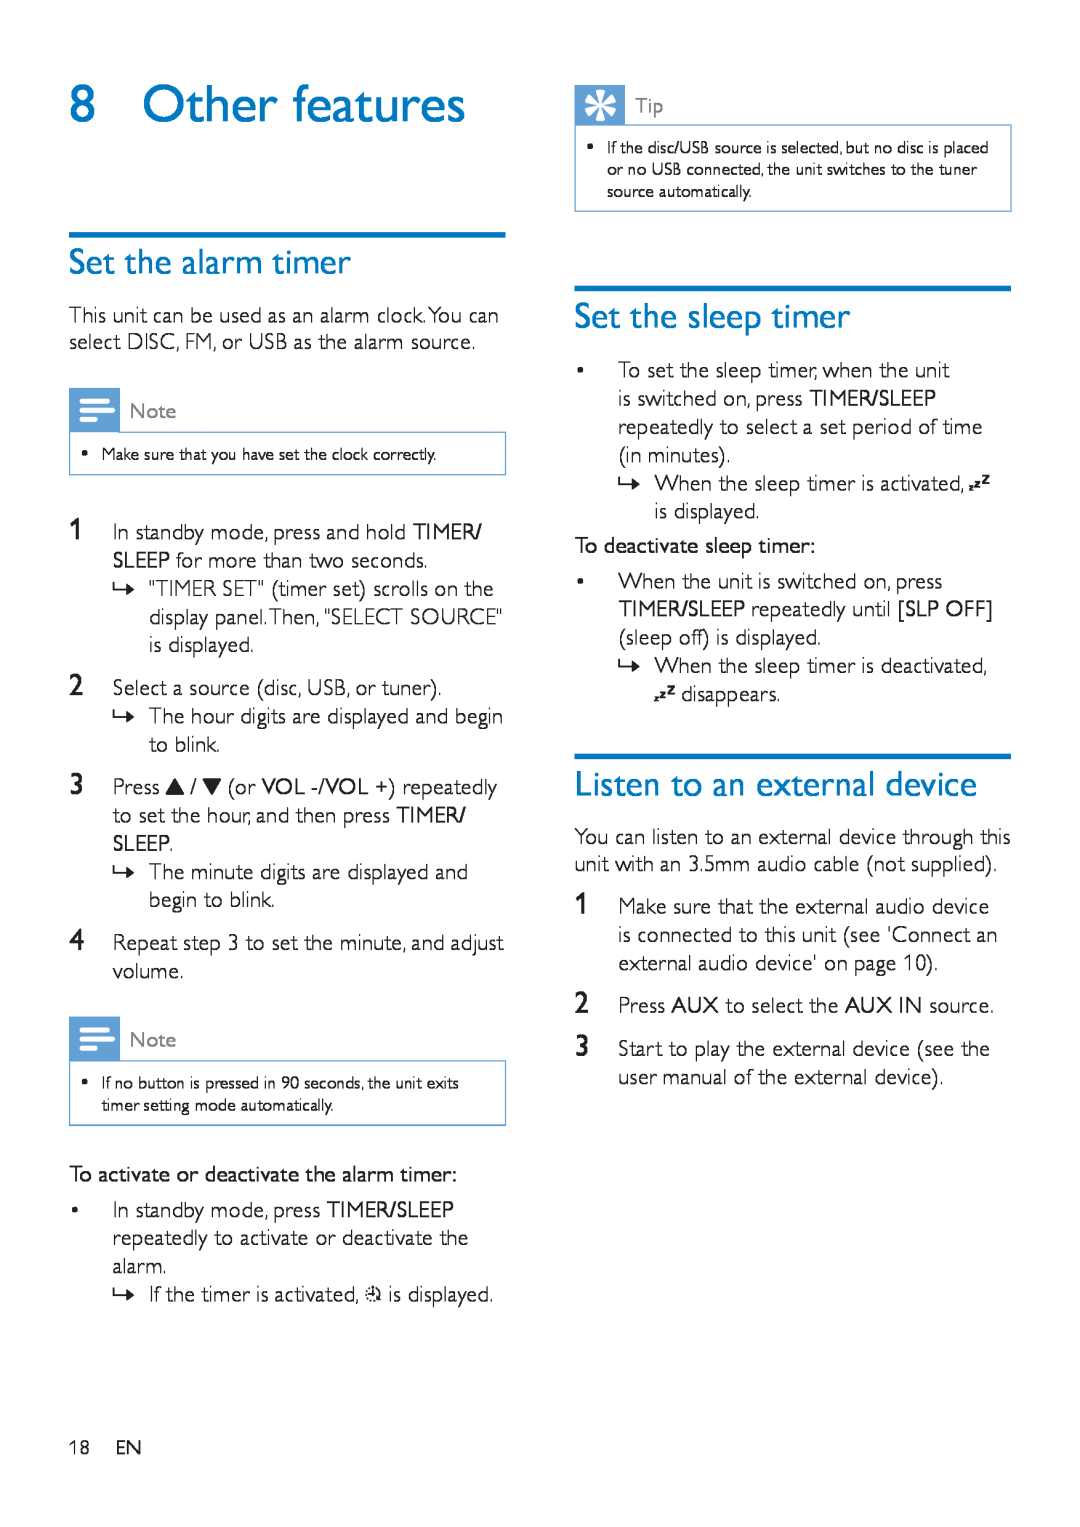 Philips MCD5110 user manual Other features, Set the alarm timer, Set the sleep timer, Listen to an external device 